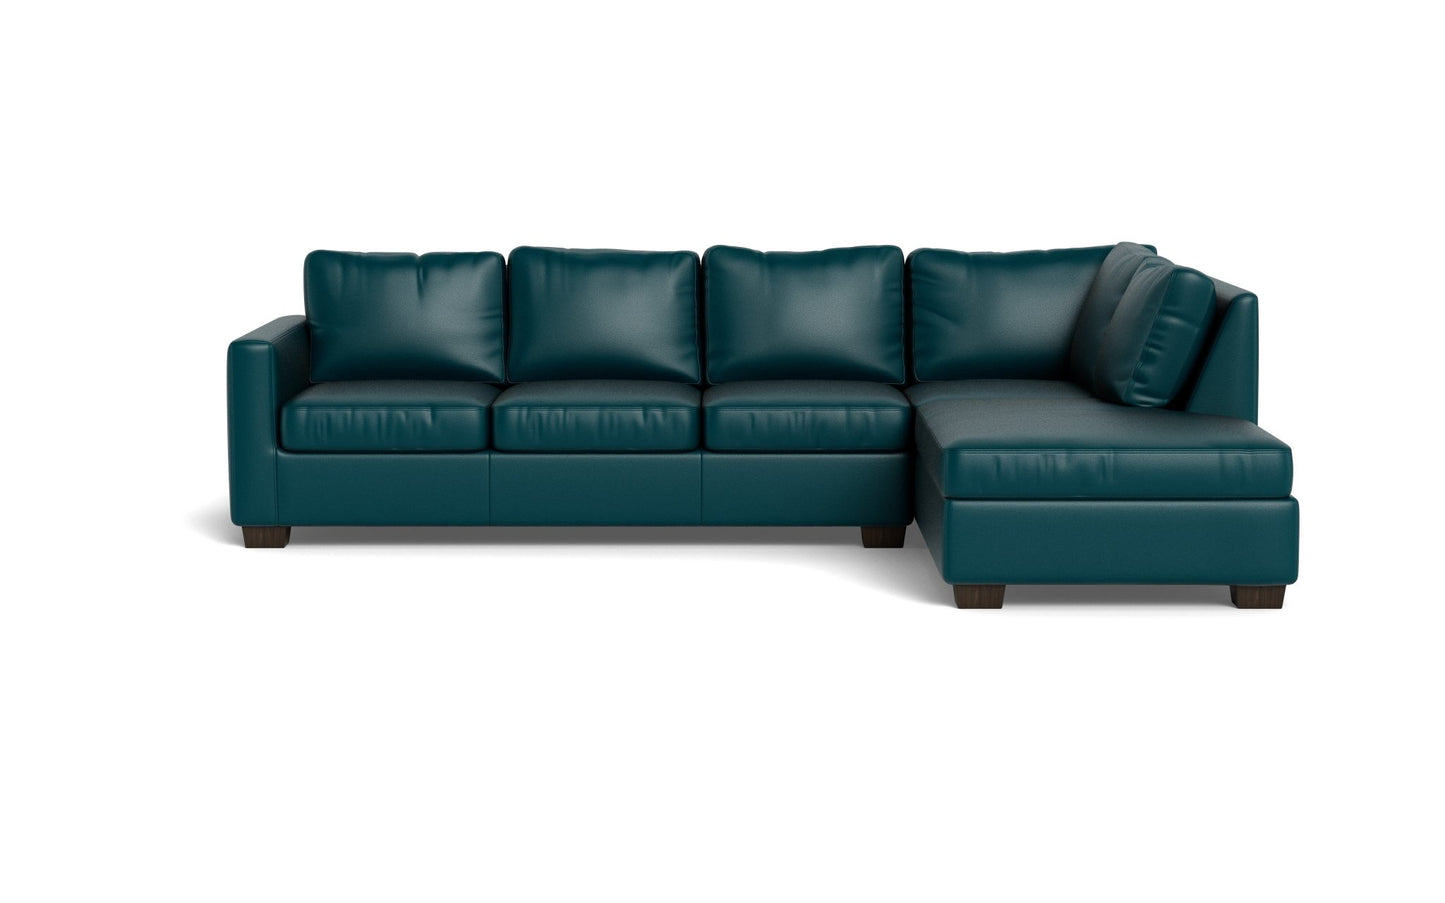 Track Leather Right Chaise Sleeper Sectional